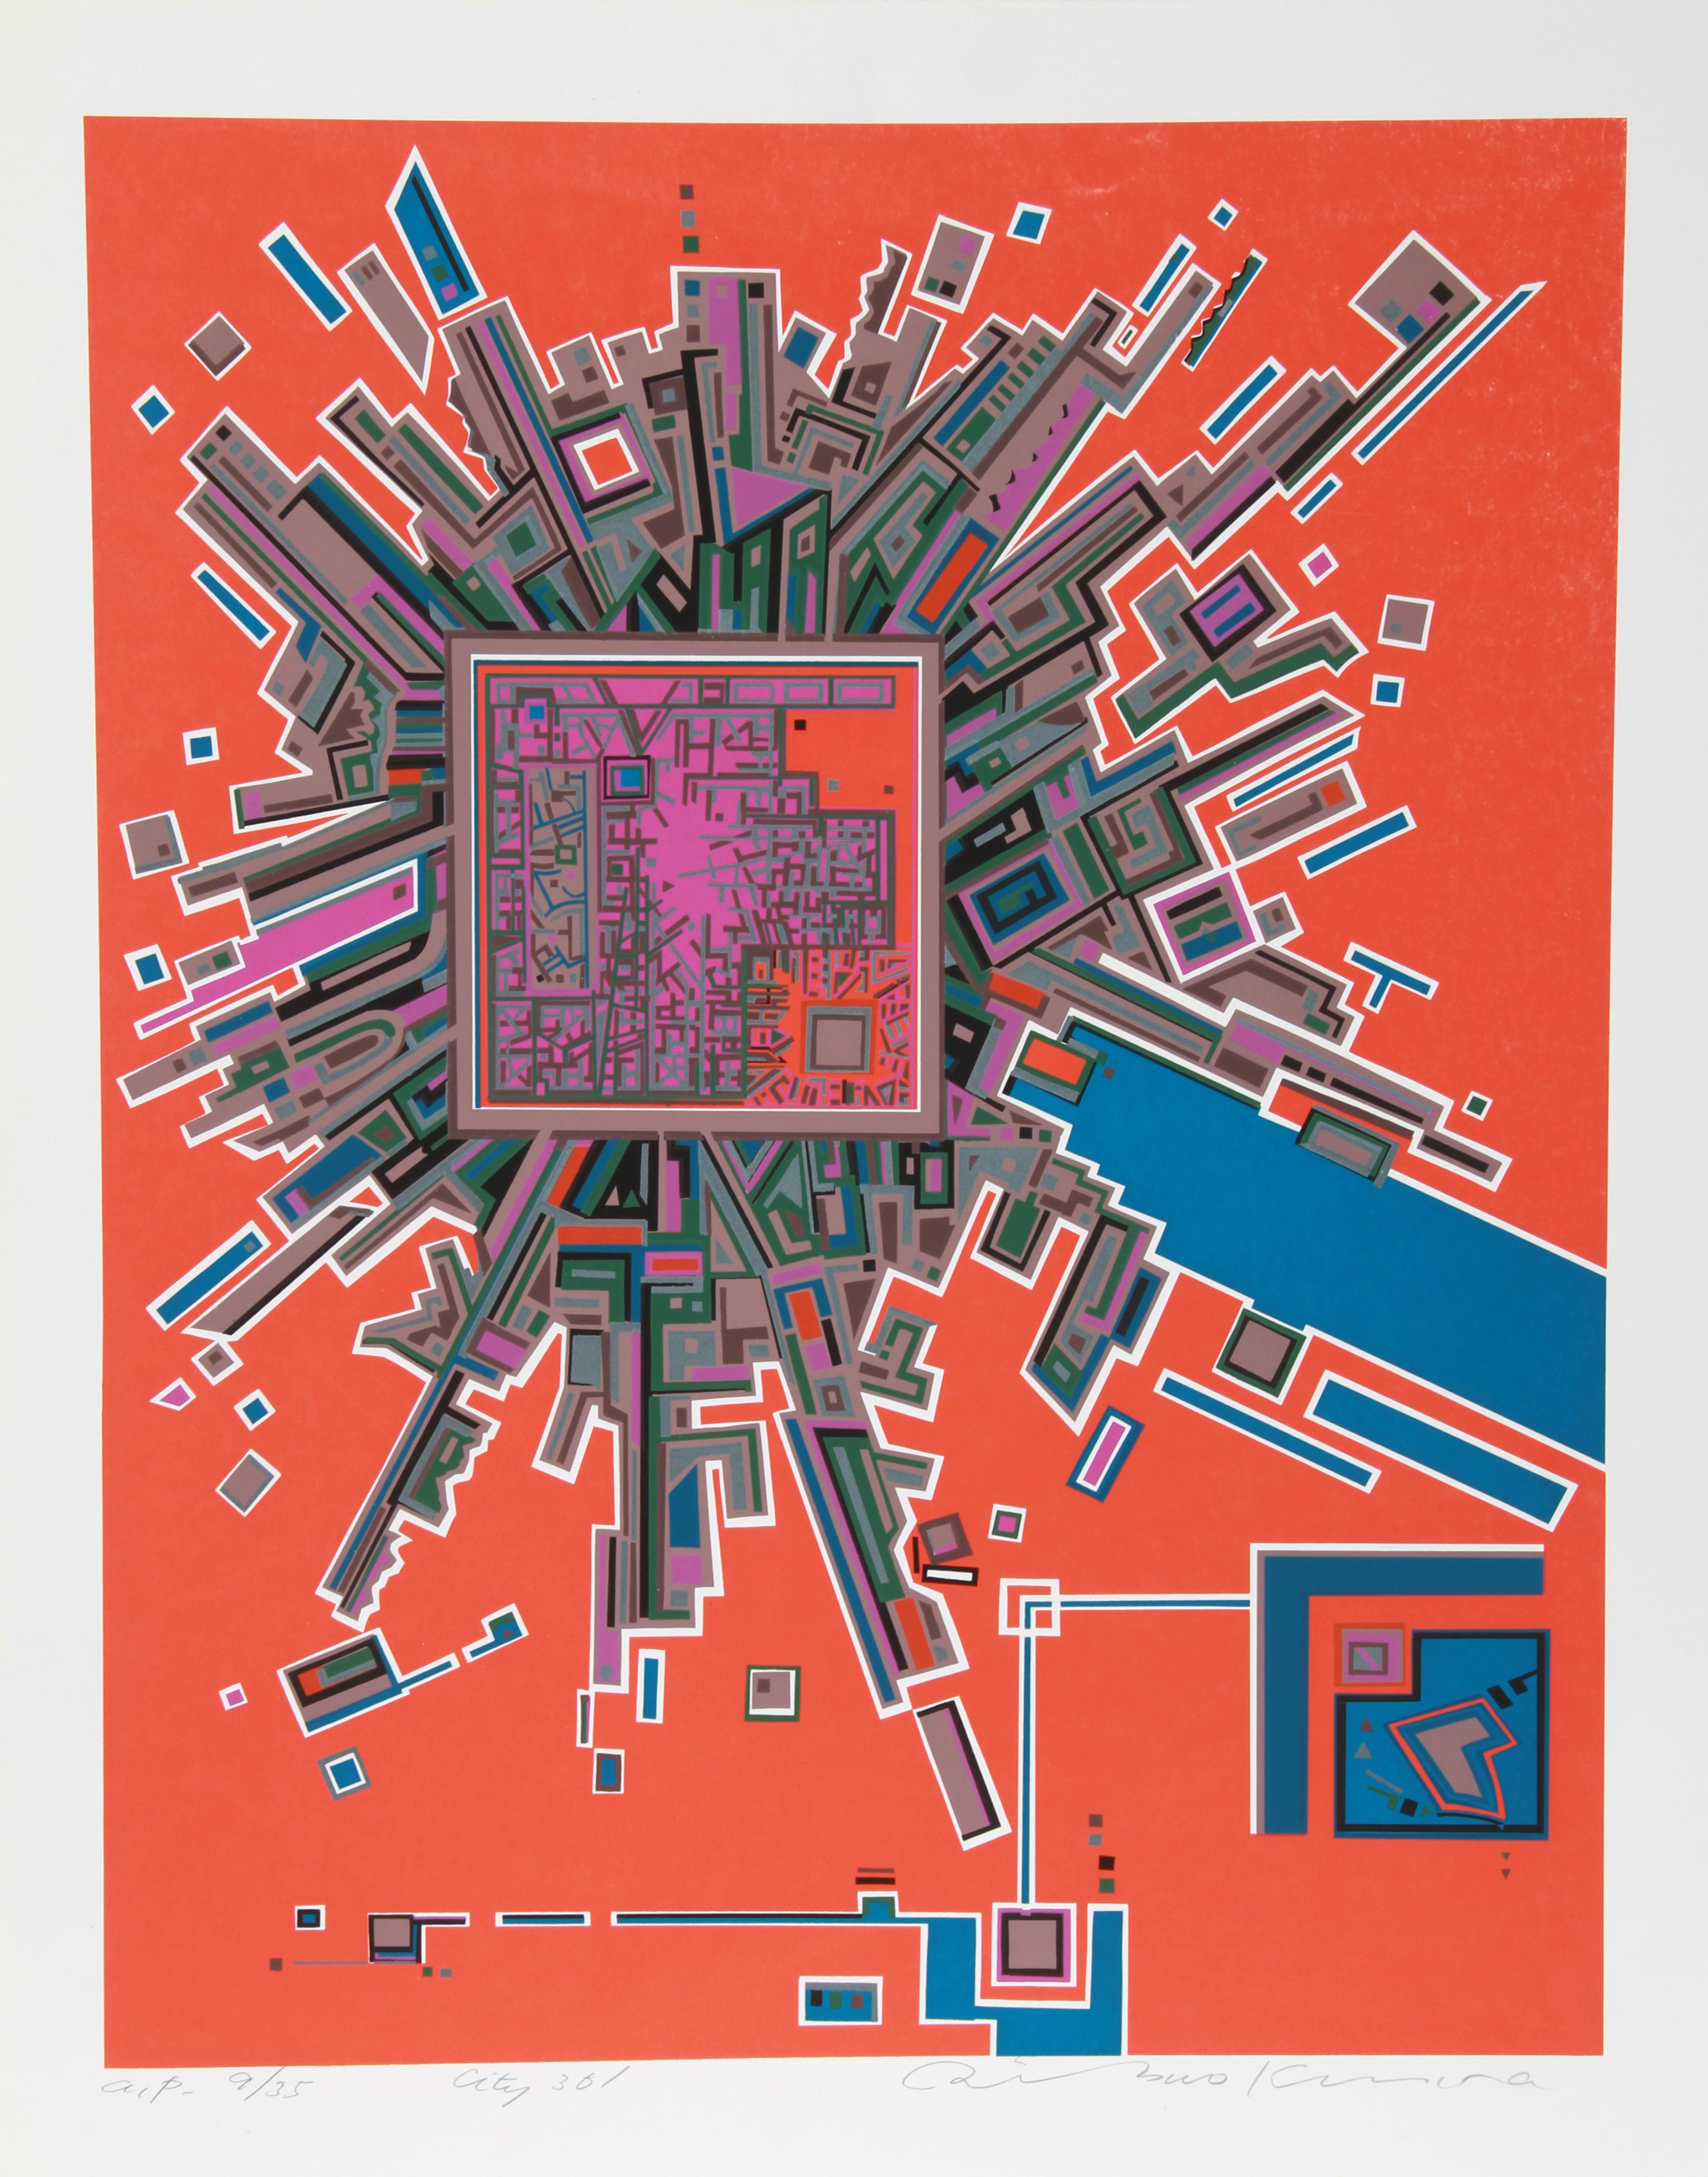 Artist:  Risaburo Kimura, Japanese (1924 - )
Title:  City 361
Year:  1971
Medium:  Serigraph, signed and numbered in pencil
Edition:  300; AP 35
Image Size:  25 x 20 inches
Size:  29 in. x 23 in. (73.66 cm x 58.42 cm)